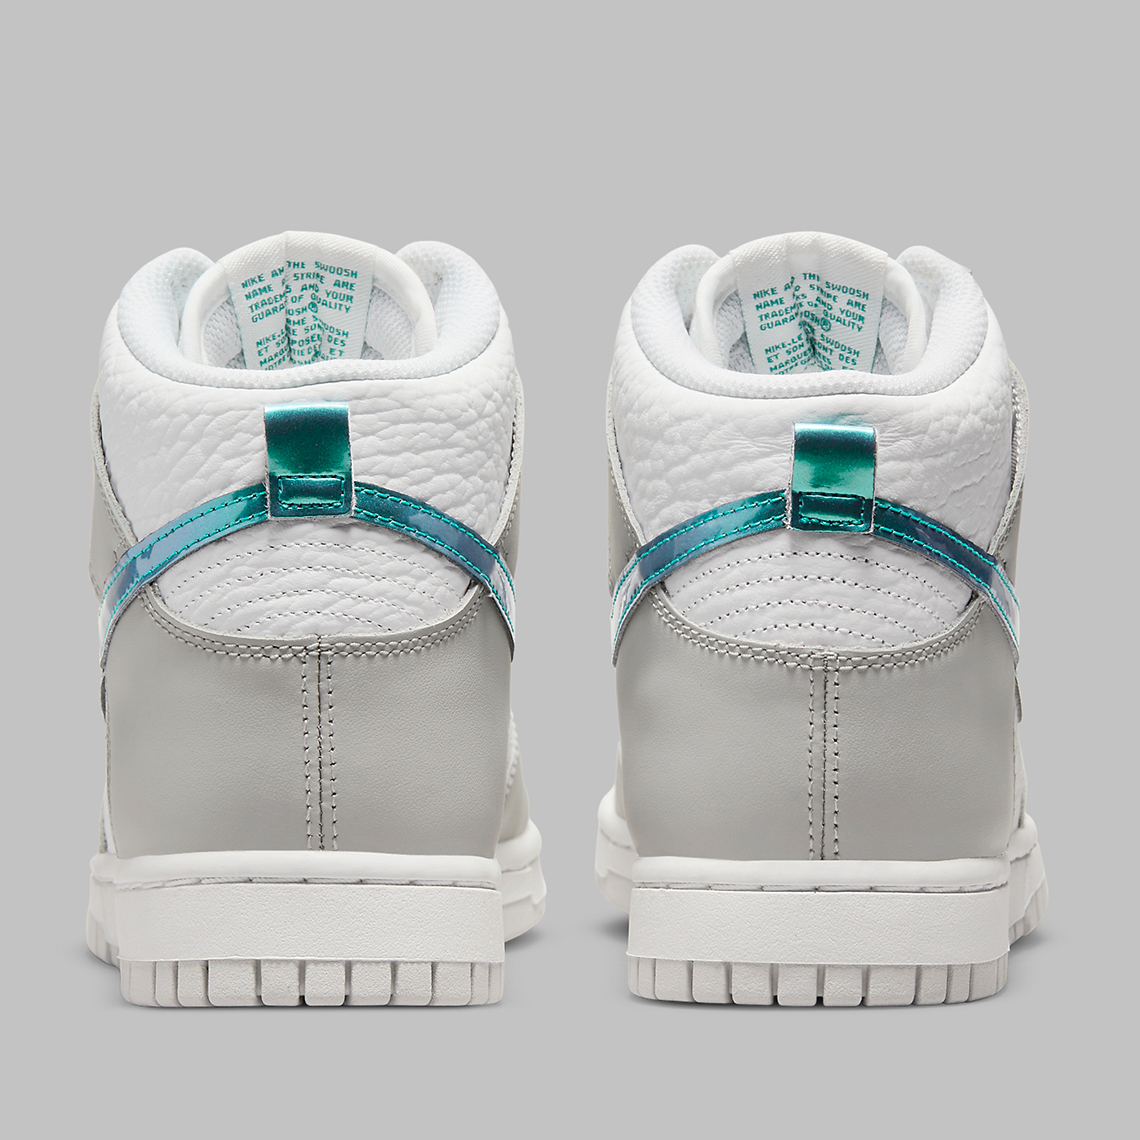 Nike Dunk High White Grey Turquoise Dr7855 100 7